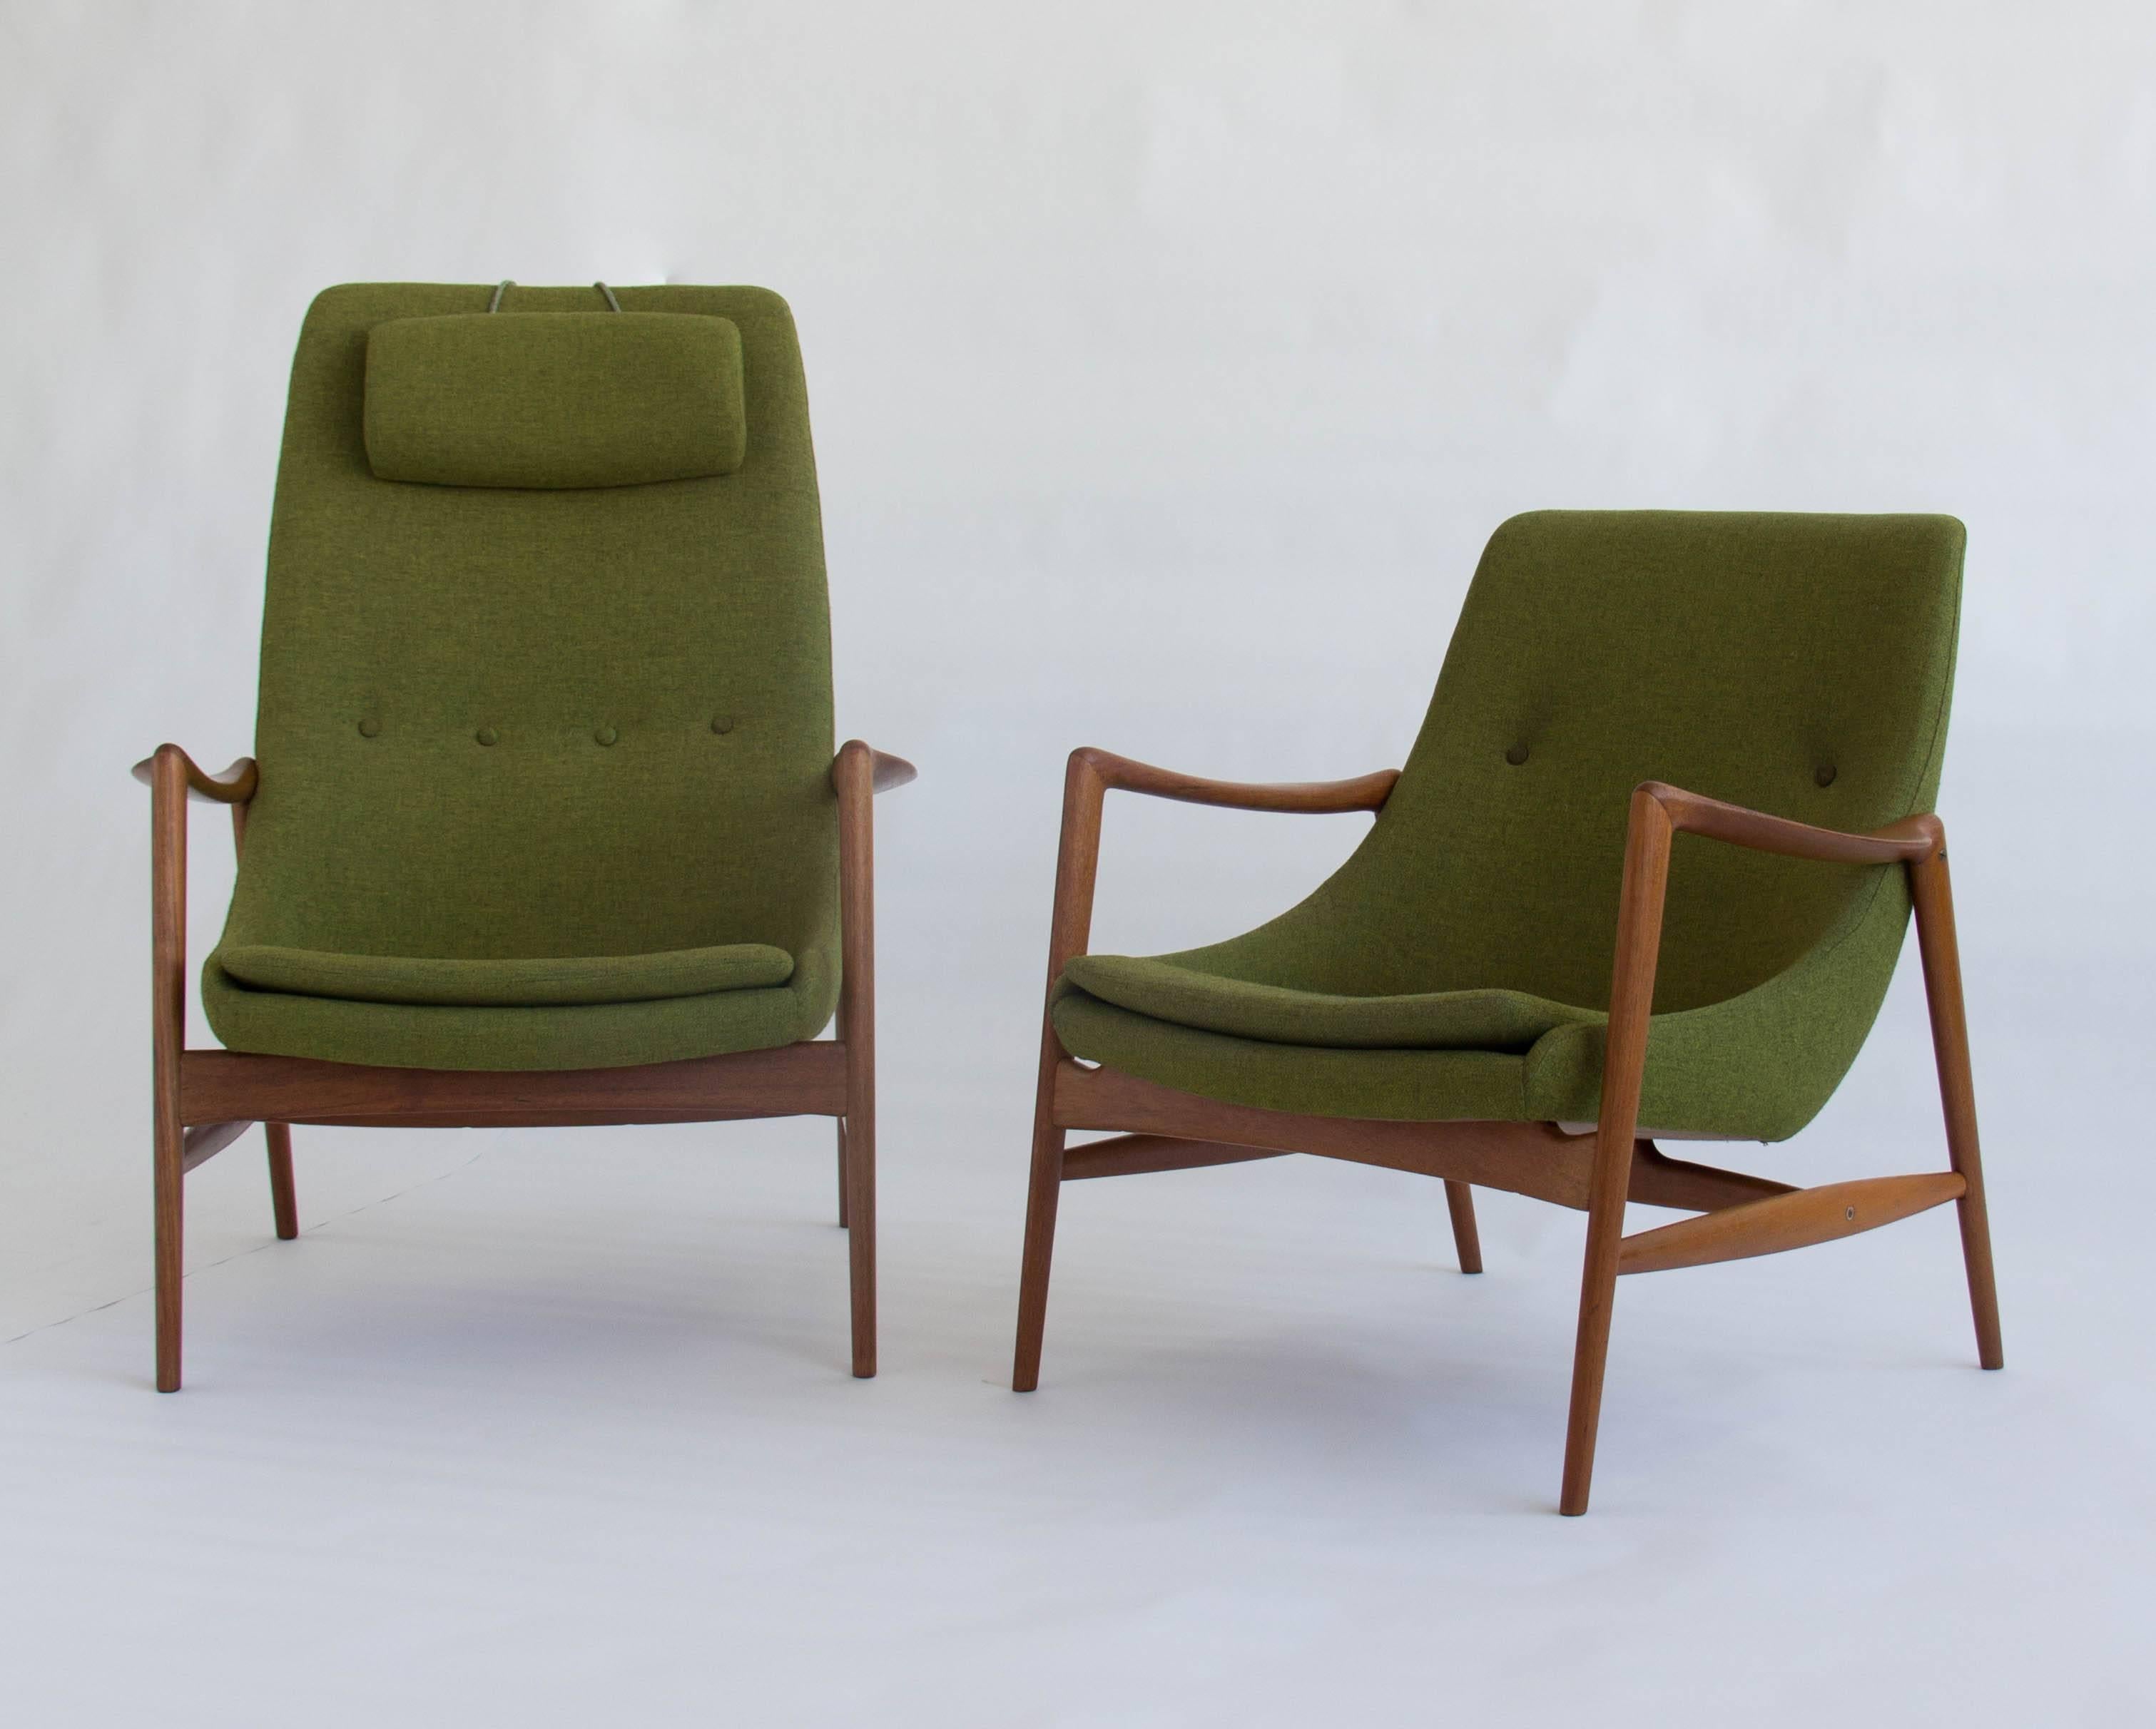 This stunning pair of armchairs designed by Rolf Rastad Adolf Relling features a sculptural teak frame and incredibly comfortable seats in their original green upholstery. The 